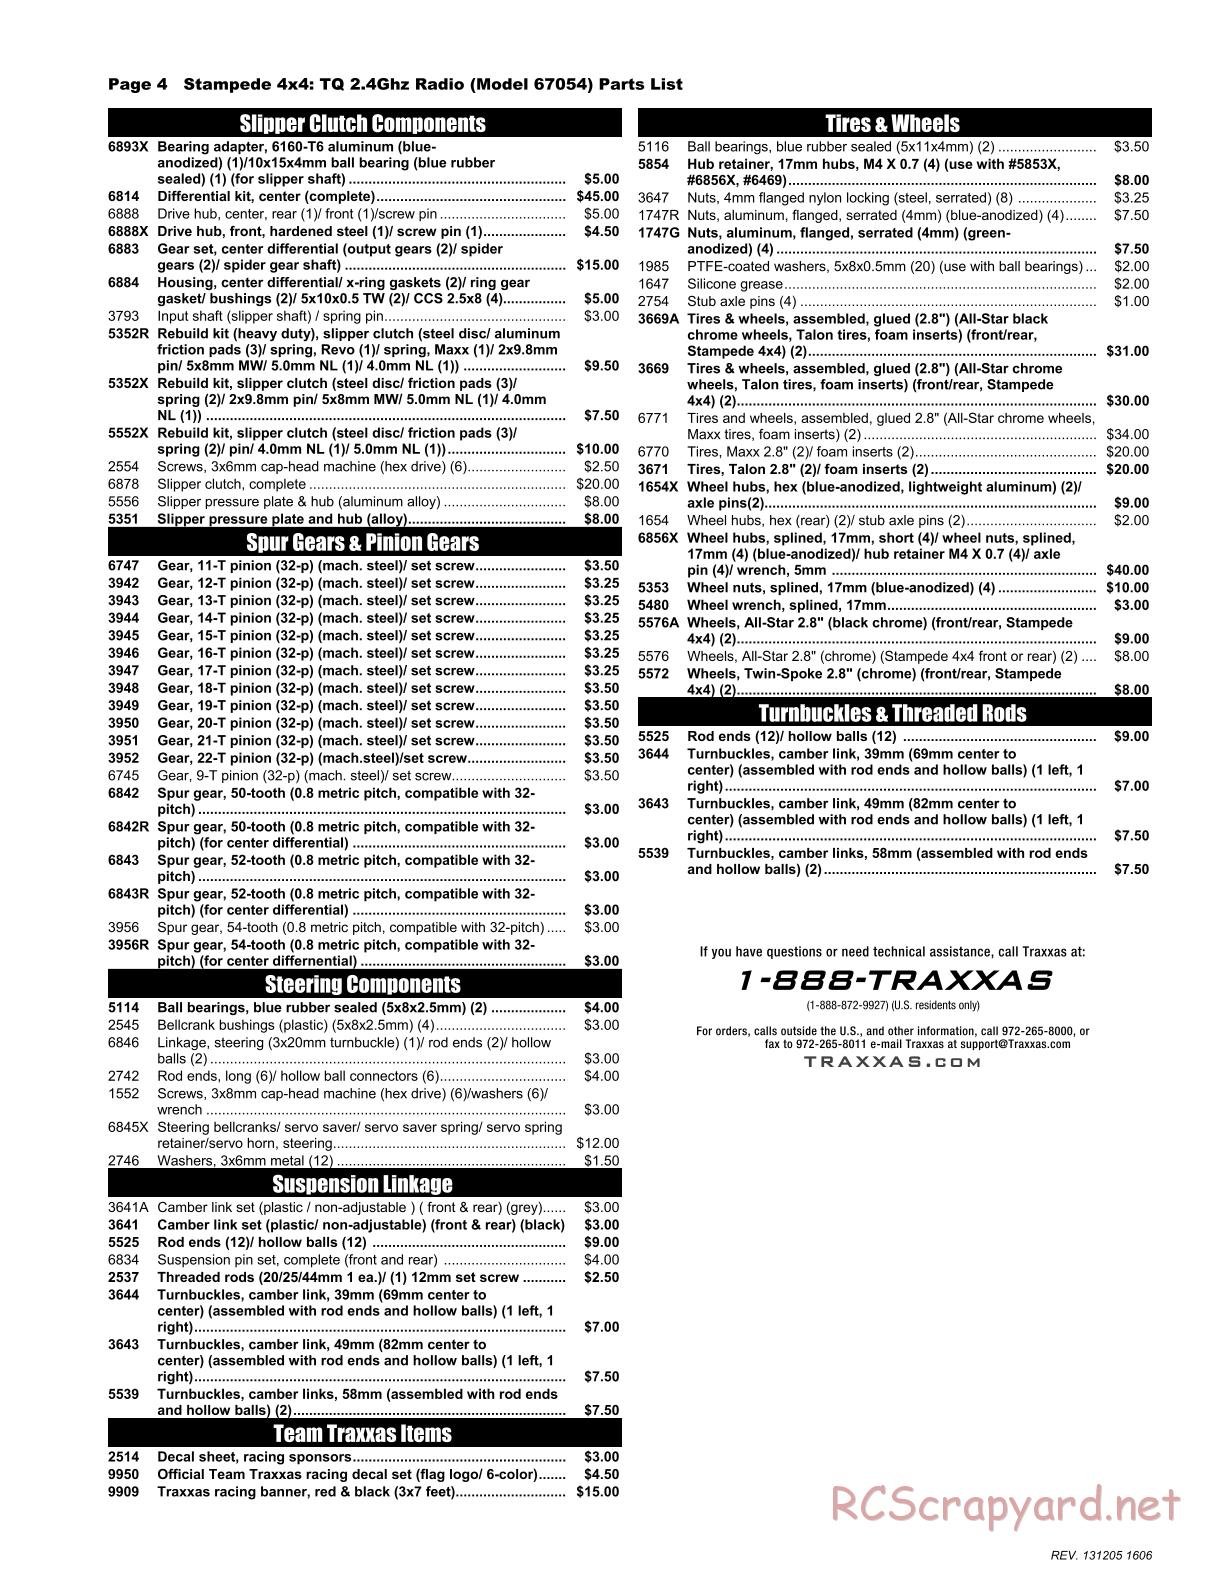 Traxxas - Stampede 4x4 (2013) - Parts List - Page 4